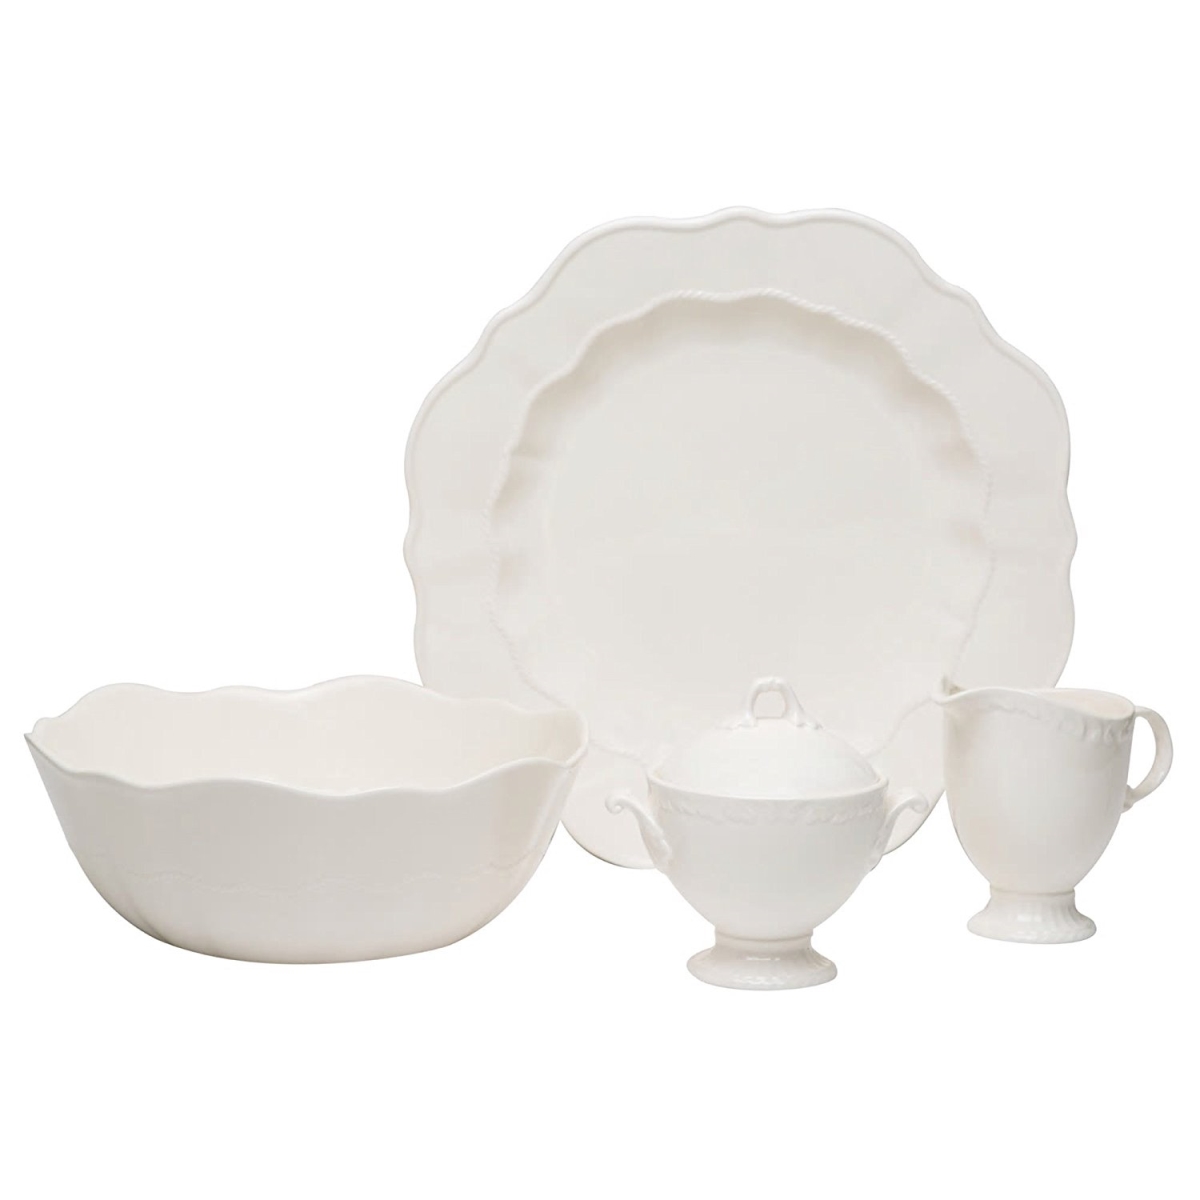 Fq900-005 Country Estate White Serving Set, 5 Piece